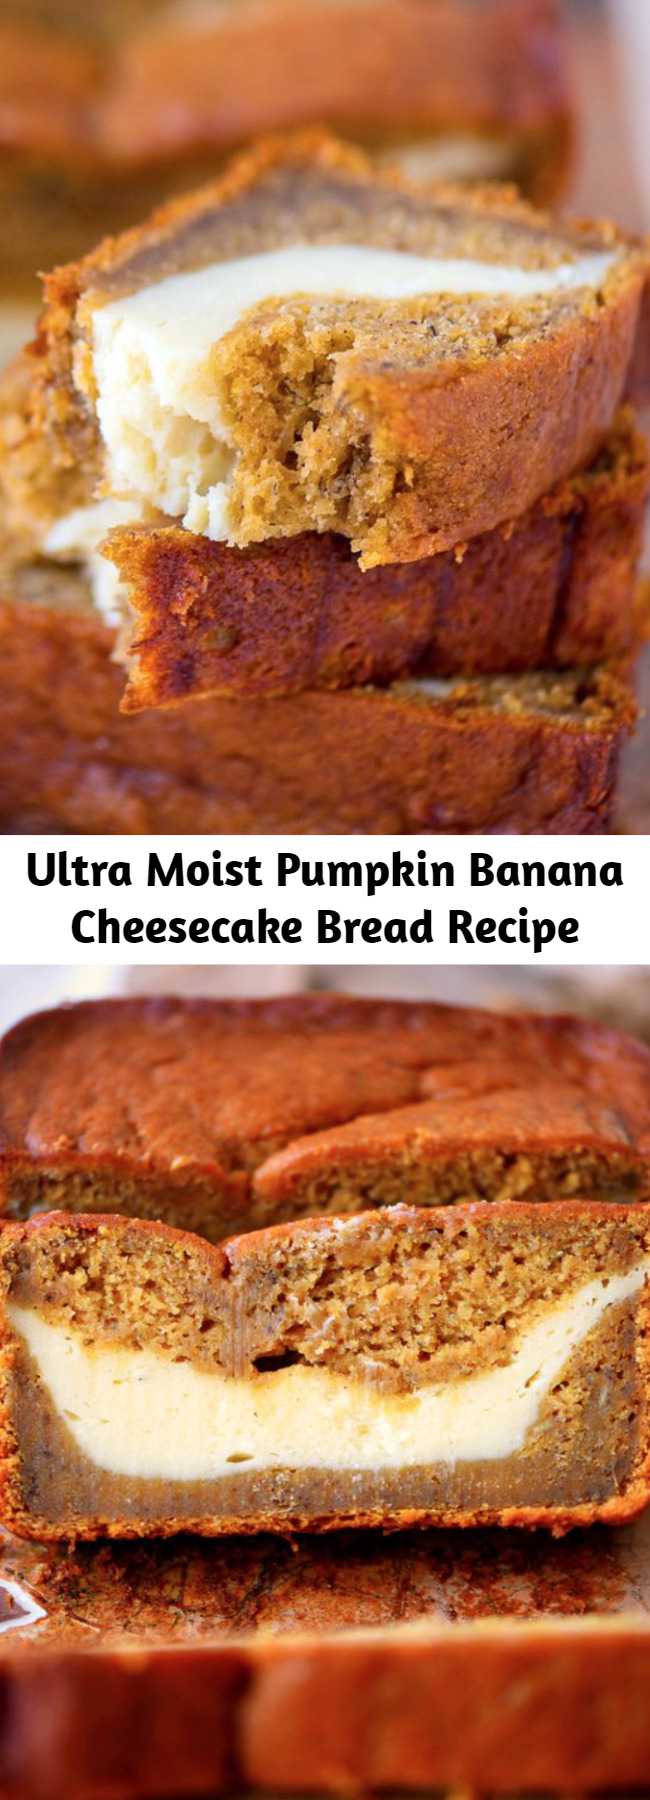 Ultra Moist Pumpkin Banana Cheesecake Bread Recipe - This Pumpkin Cheesecake Banana Bread is perfect for dessert but also doubles as an amazing breakfast...or snack...or lunch. It's pretty amazing no matter what time you eat it! Ultra moist and bursting with pumpkin flavor!